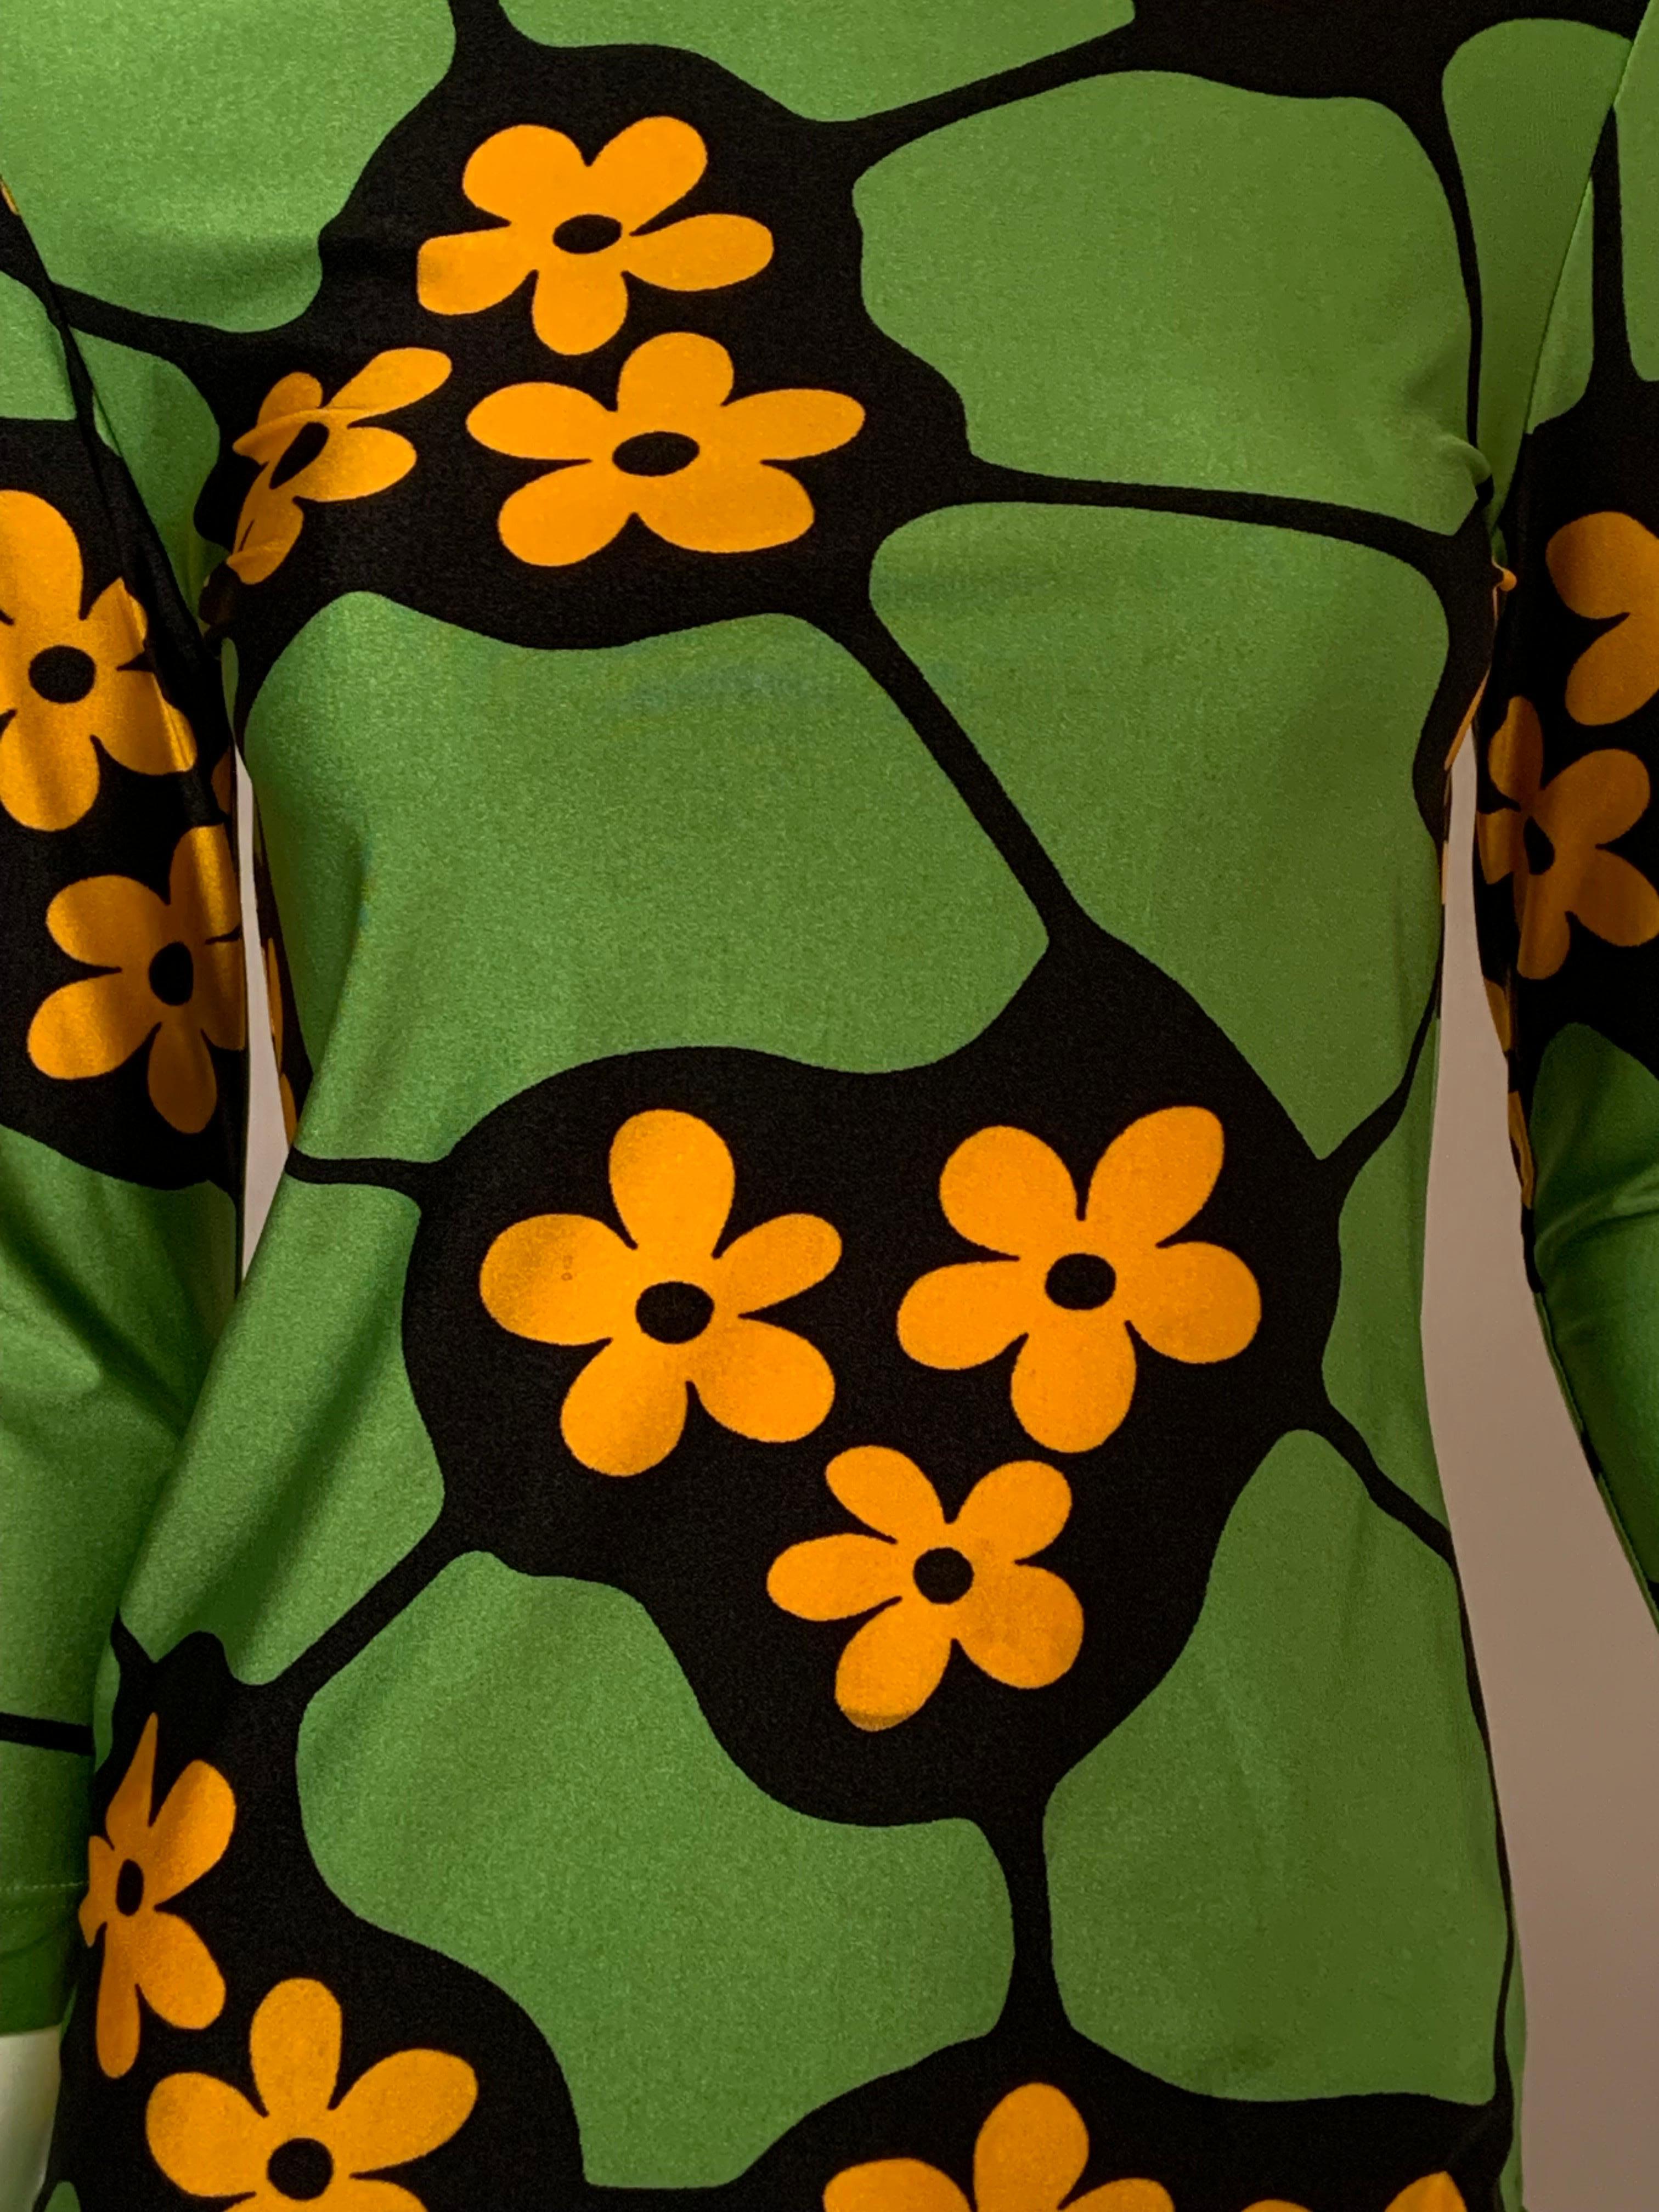 Christian Lacroix uses a vibrant green background to show off the black and yellow floral design on this pullover top.  The top has a boatneck, 3/4 sleeves and is hip length.  It is in excellent condition and appears to have never been worn. it is